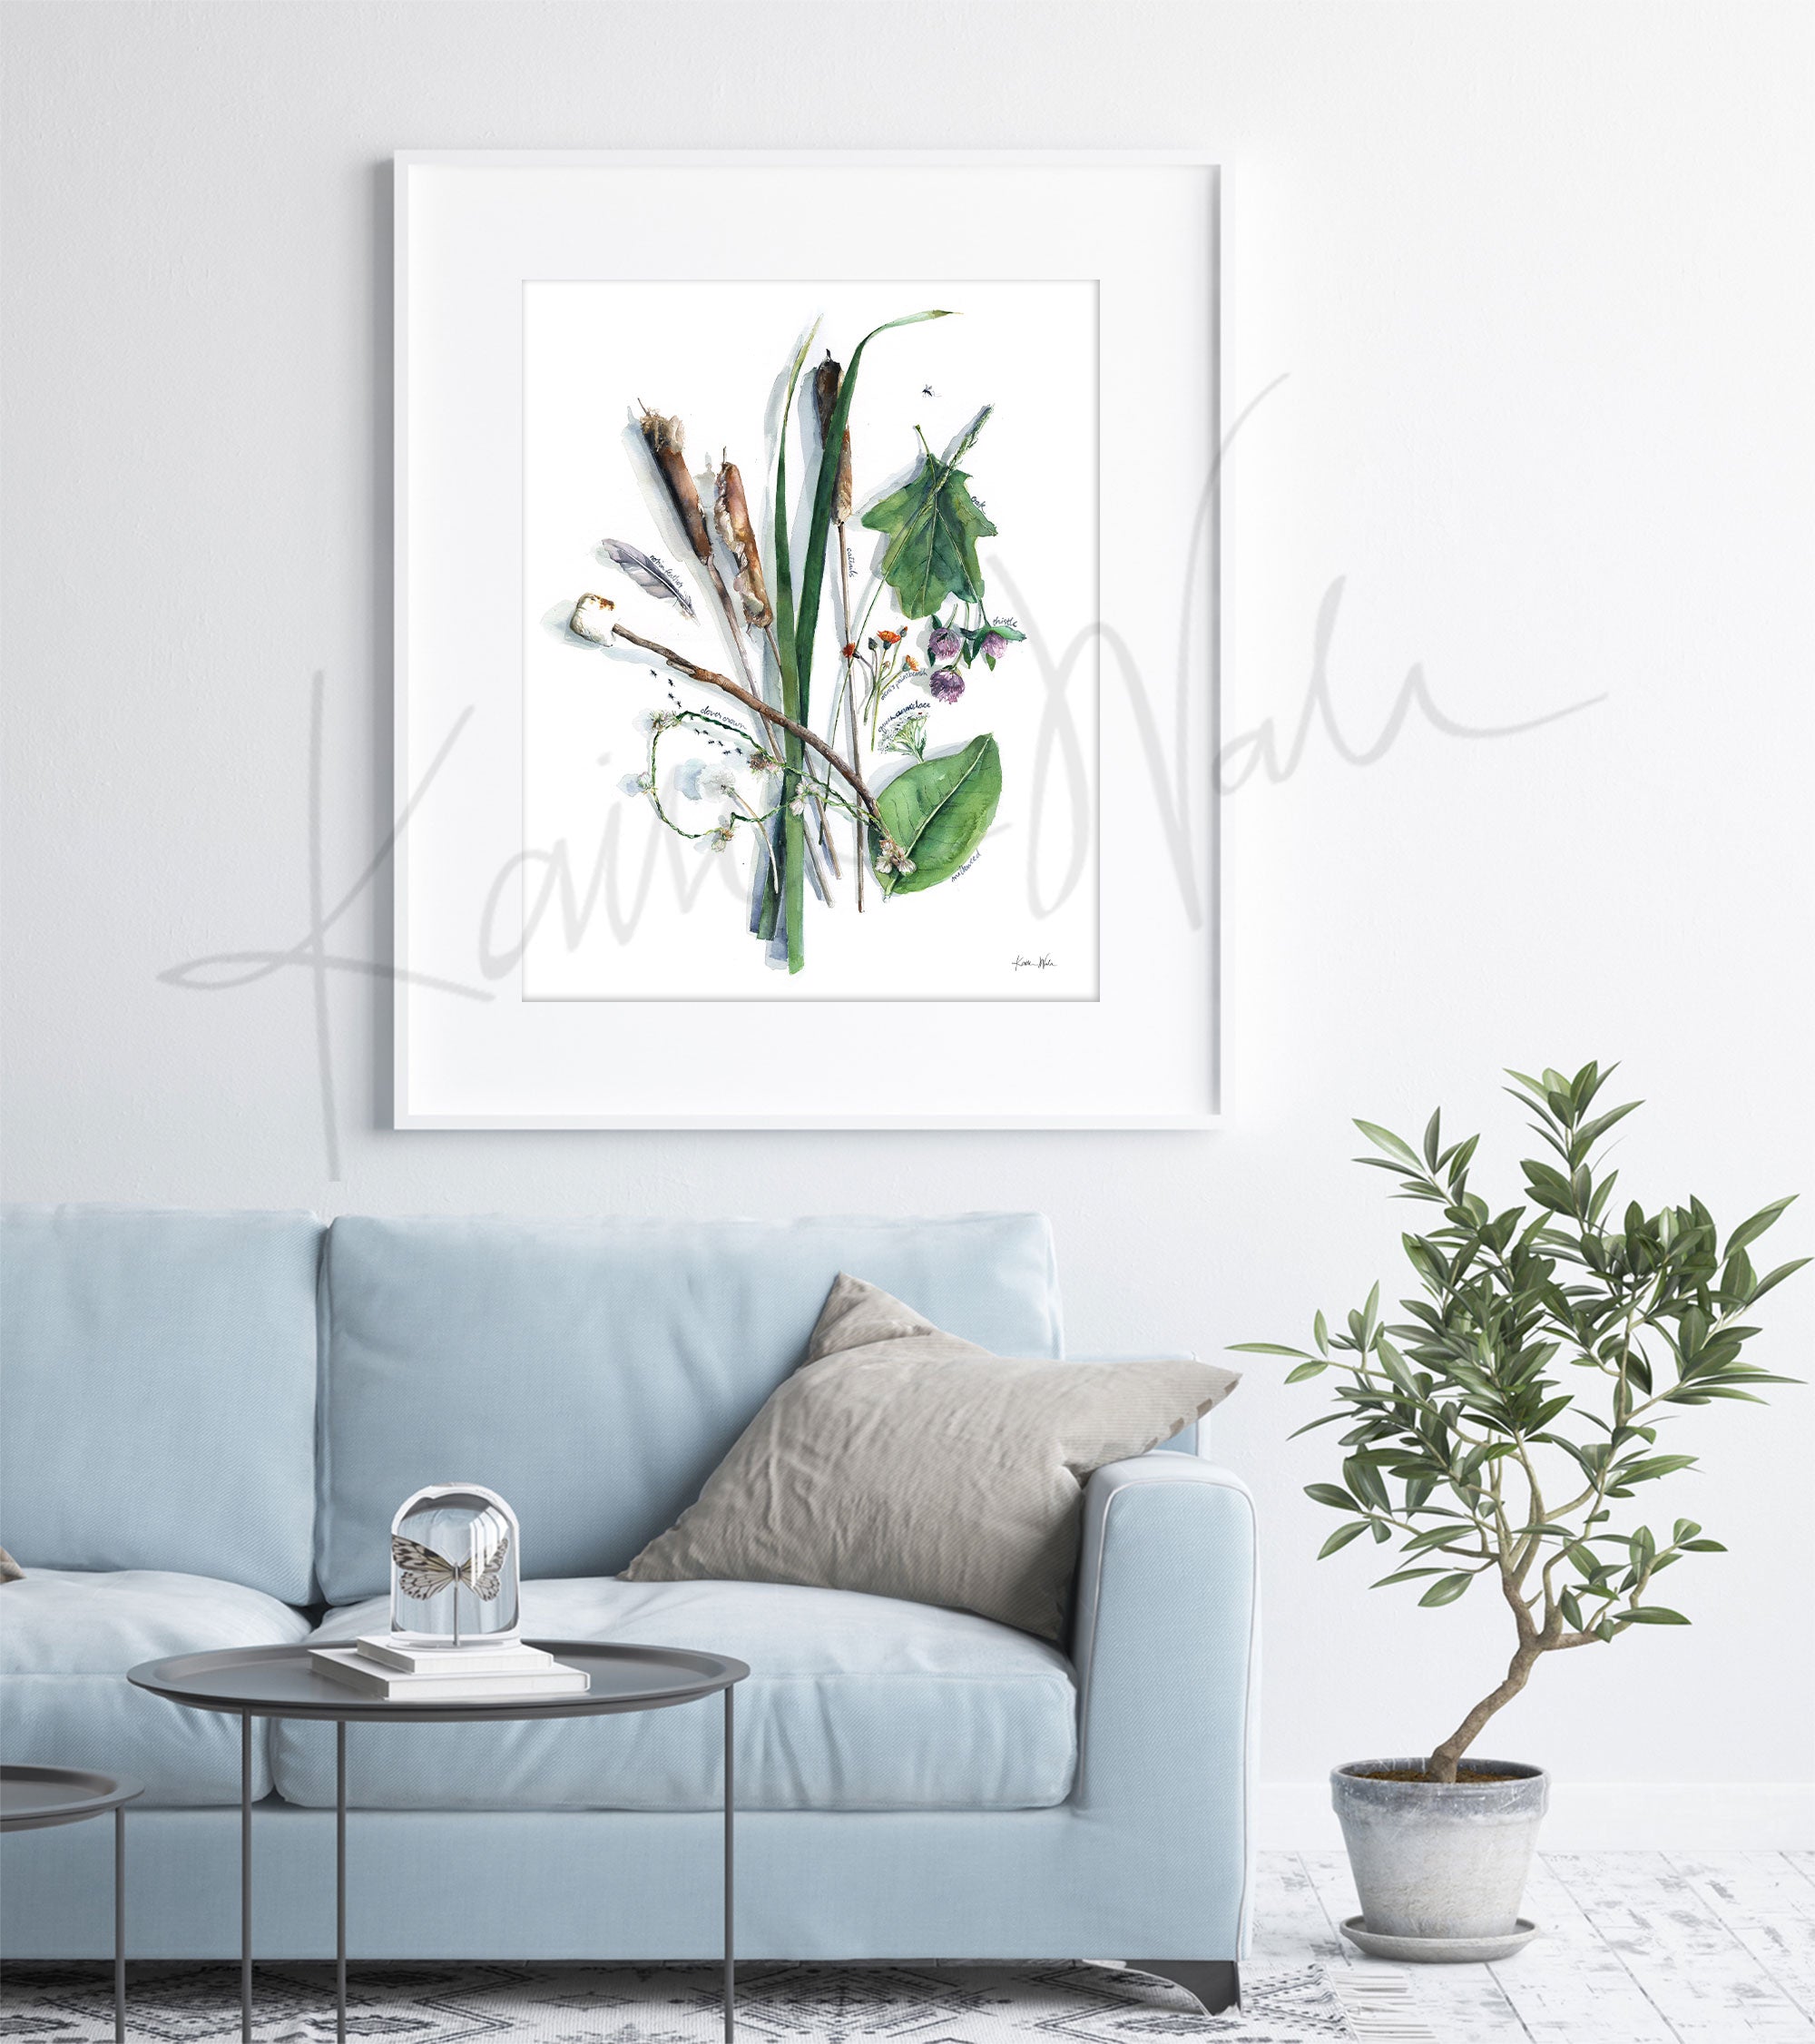 Framed watercolor painting of a collection of summer foraged items.The painting is hanging over a blue couch.